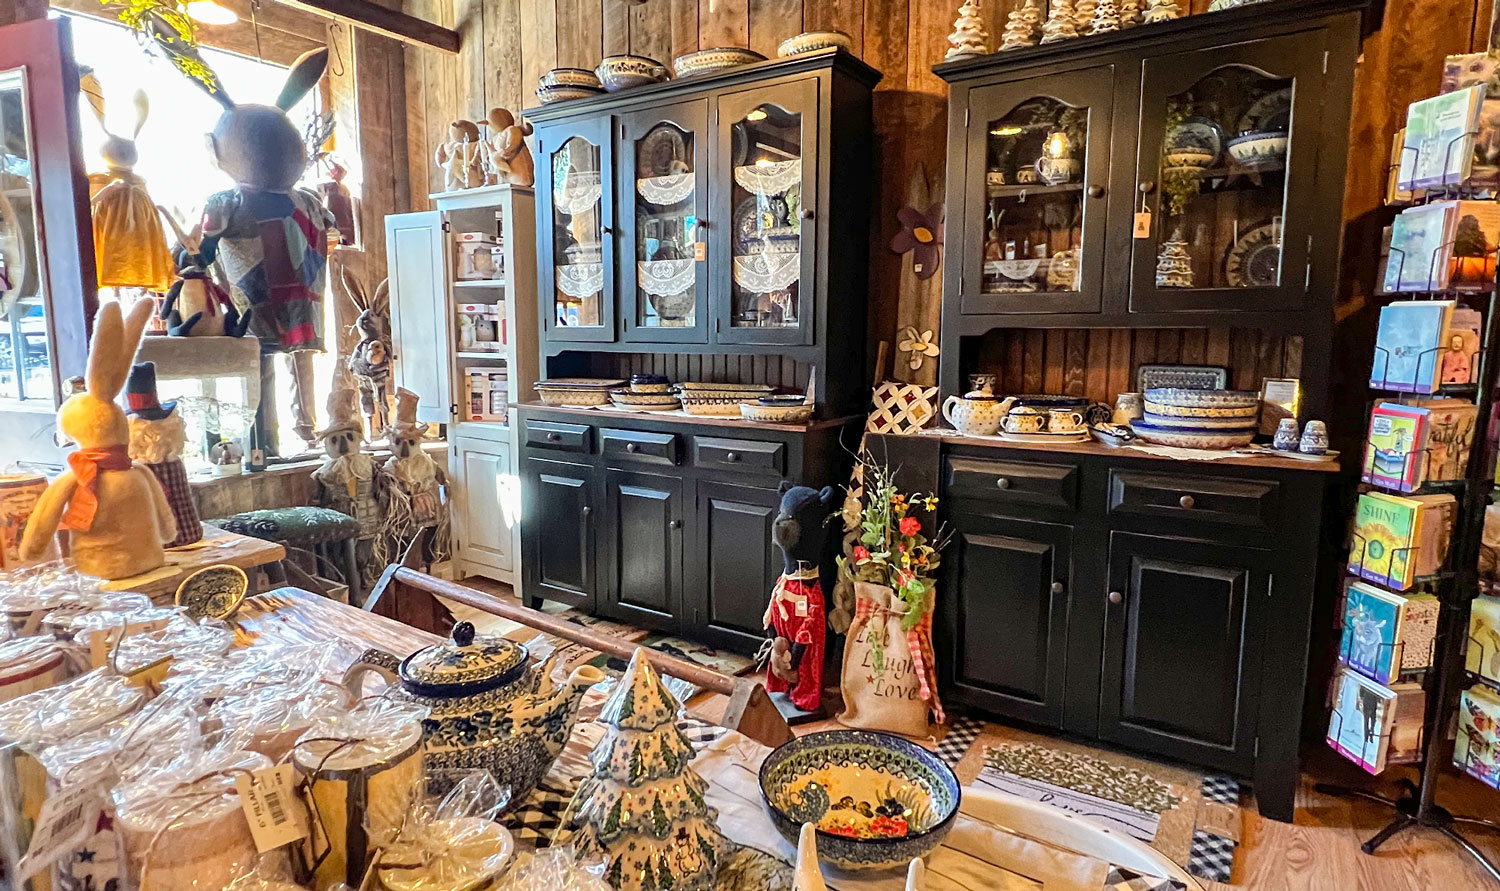 The Country Cabin inside the store